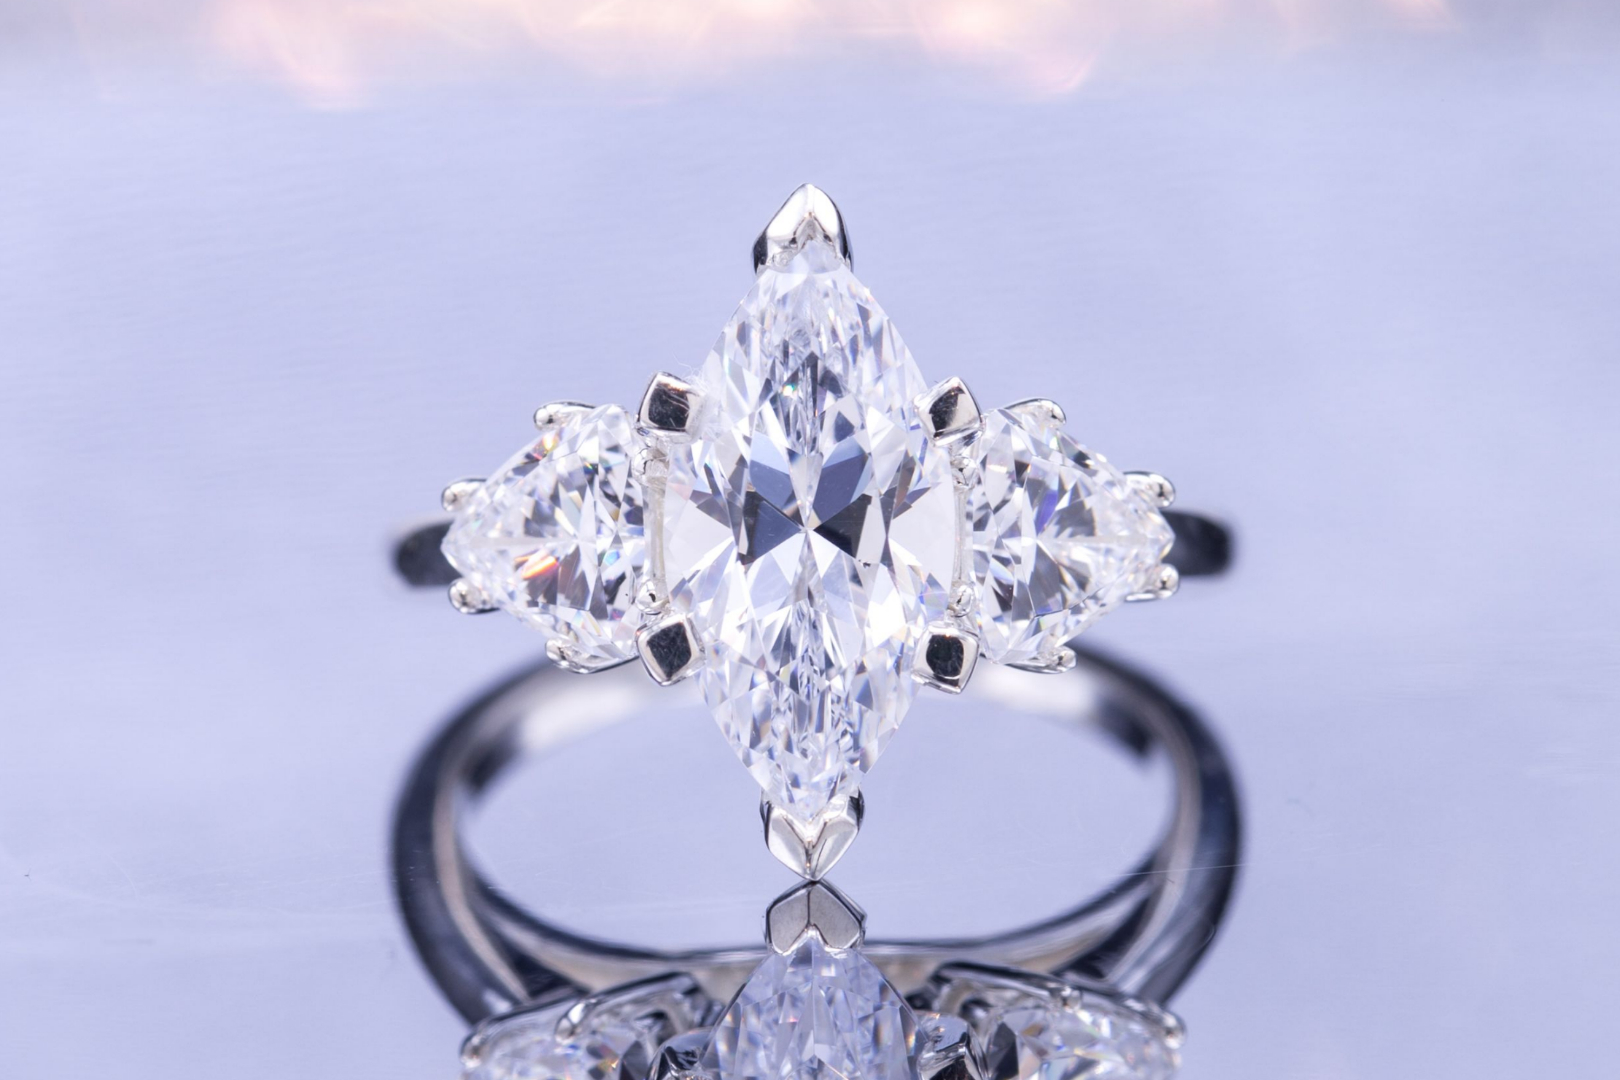 Three-stone cubic zirconia ring with marquise center stone and trillion cut side stones